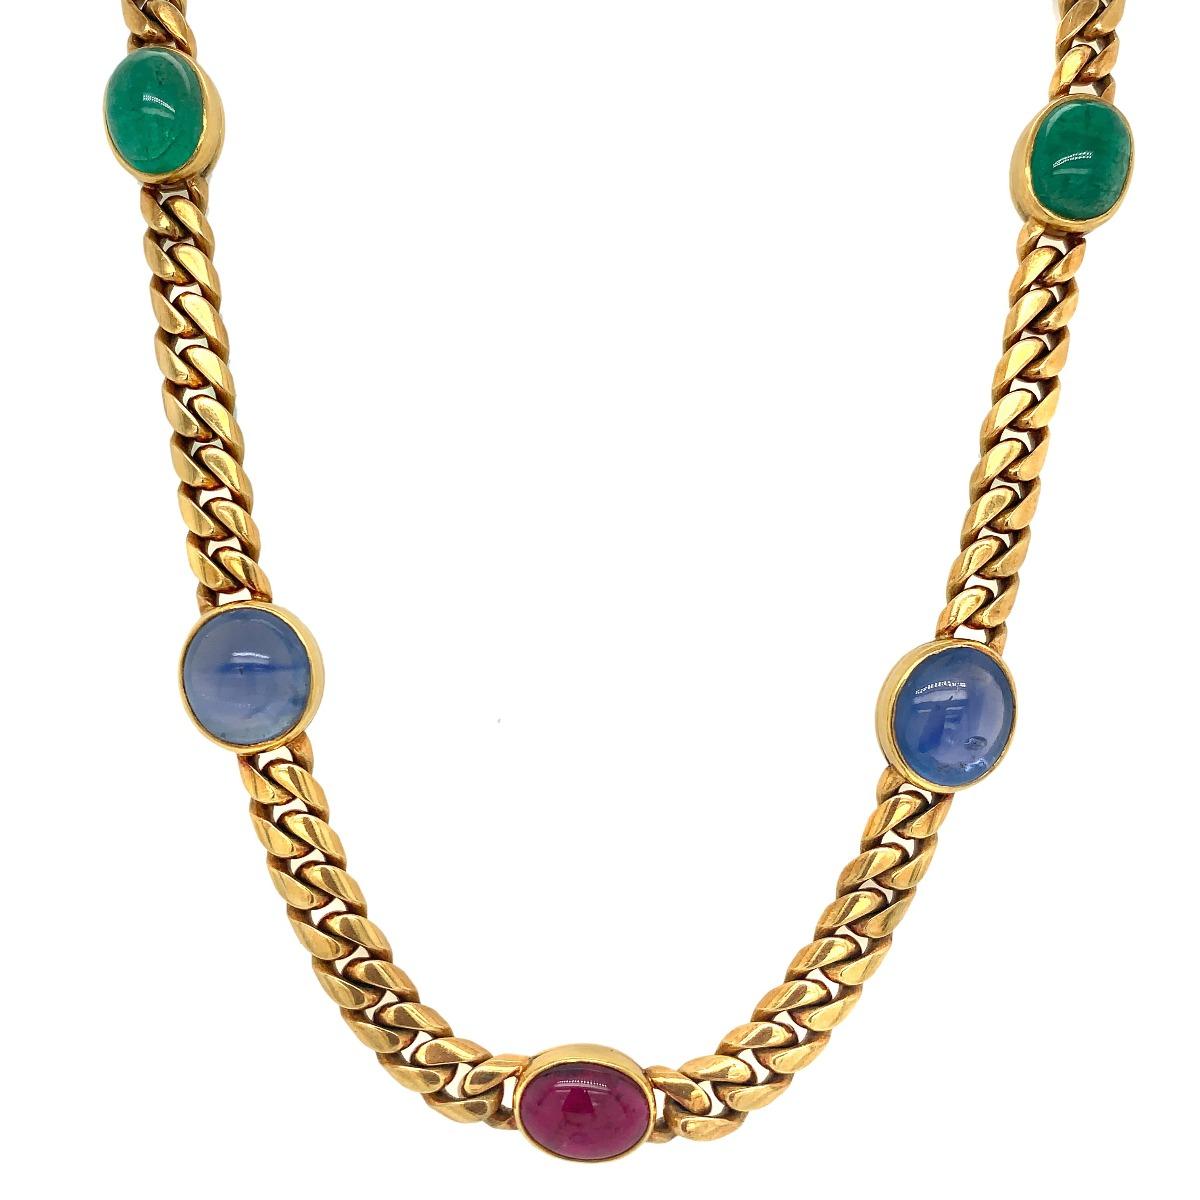 Bvlgari 18K Yellow Gold Sapphire Emerald Cabochon Ruby Link Necklace 

Brand: Bvlgari
Metal: 18K Yellow Gold
Condition: Excellent
Origin: Italy
Stamped: 750 Bvlgari 
Year Of Manufacture: 1980s
Gemstone: Sapphire, Emerald & Cabochon Ruby
Total